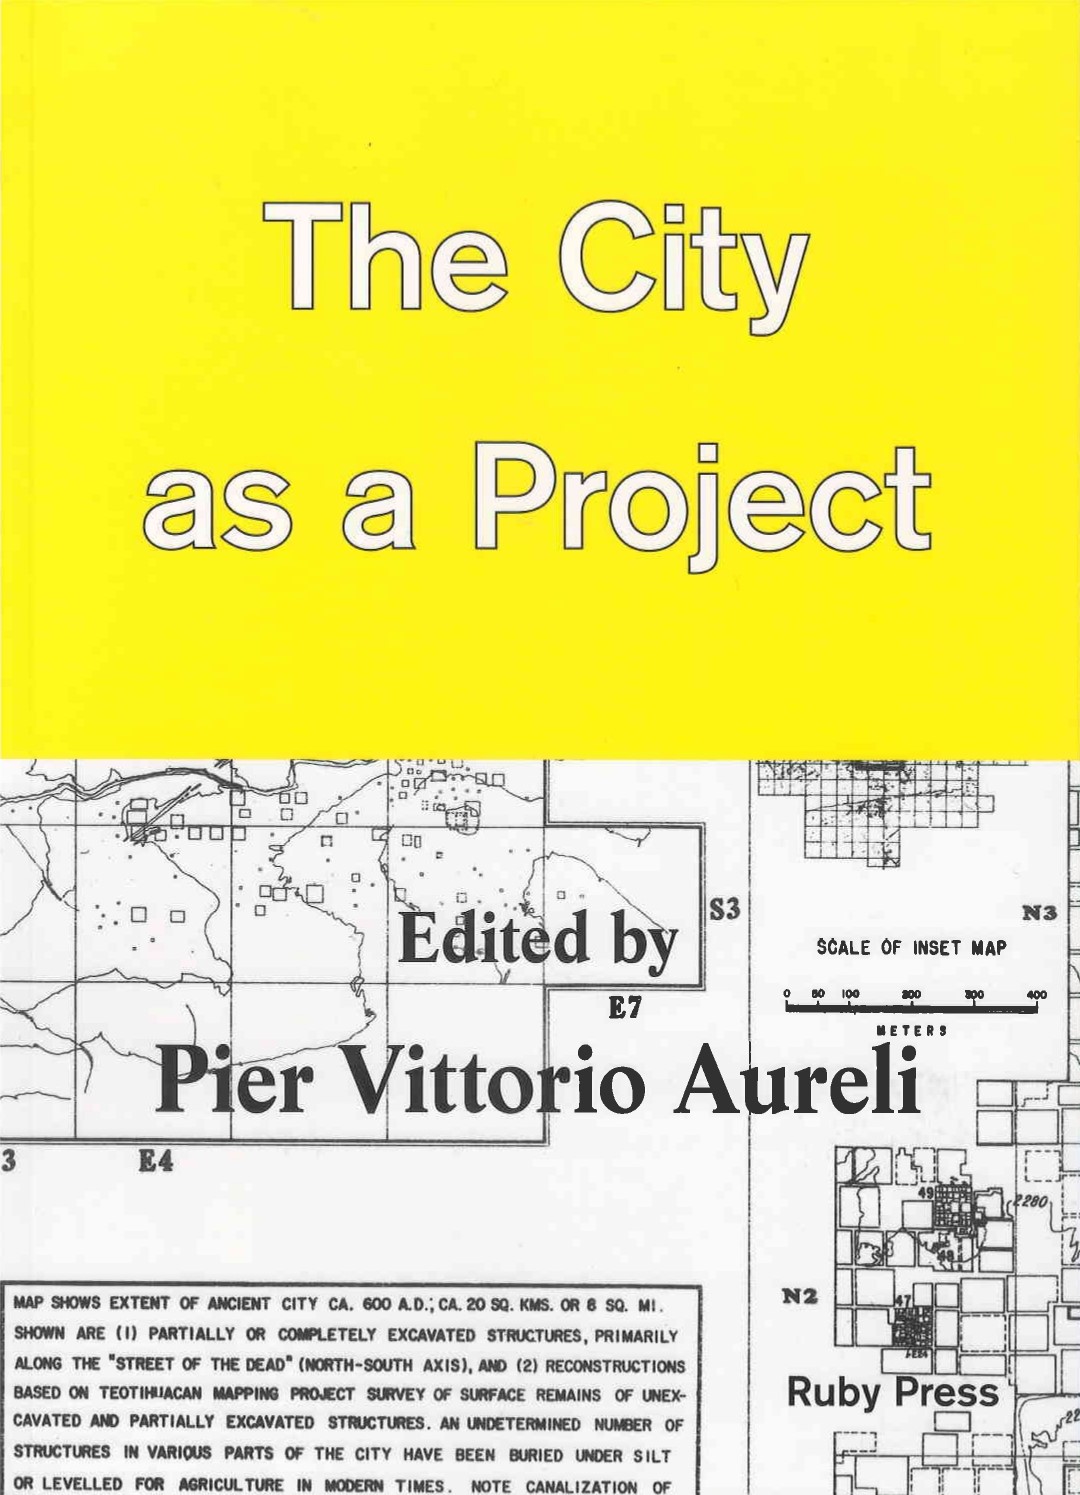 The city as a project